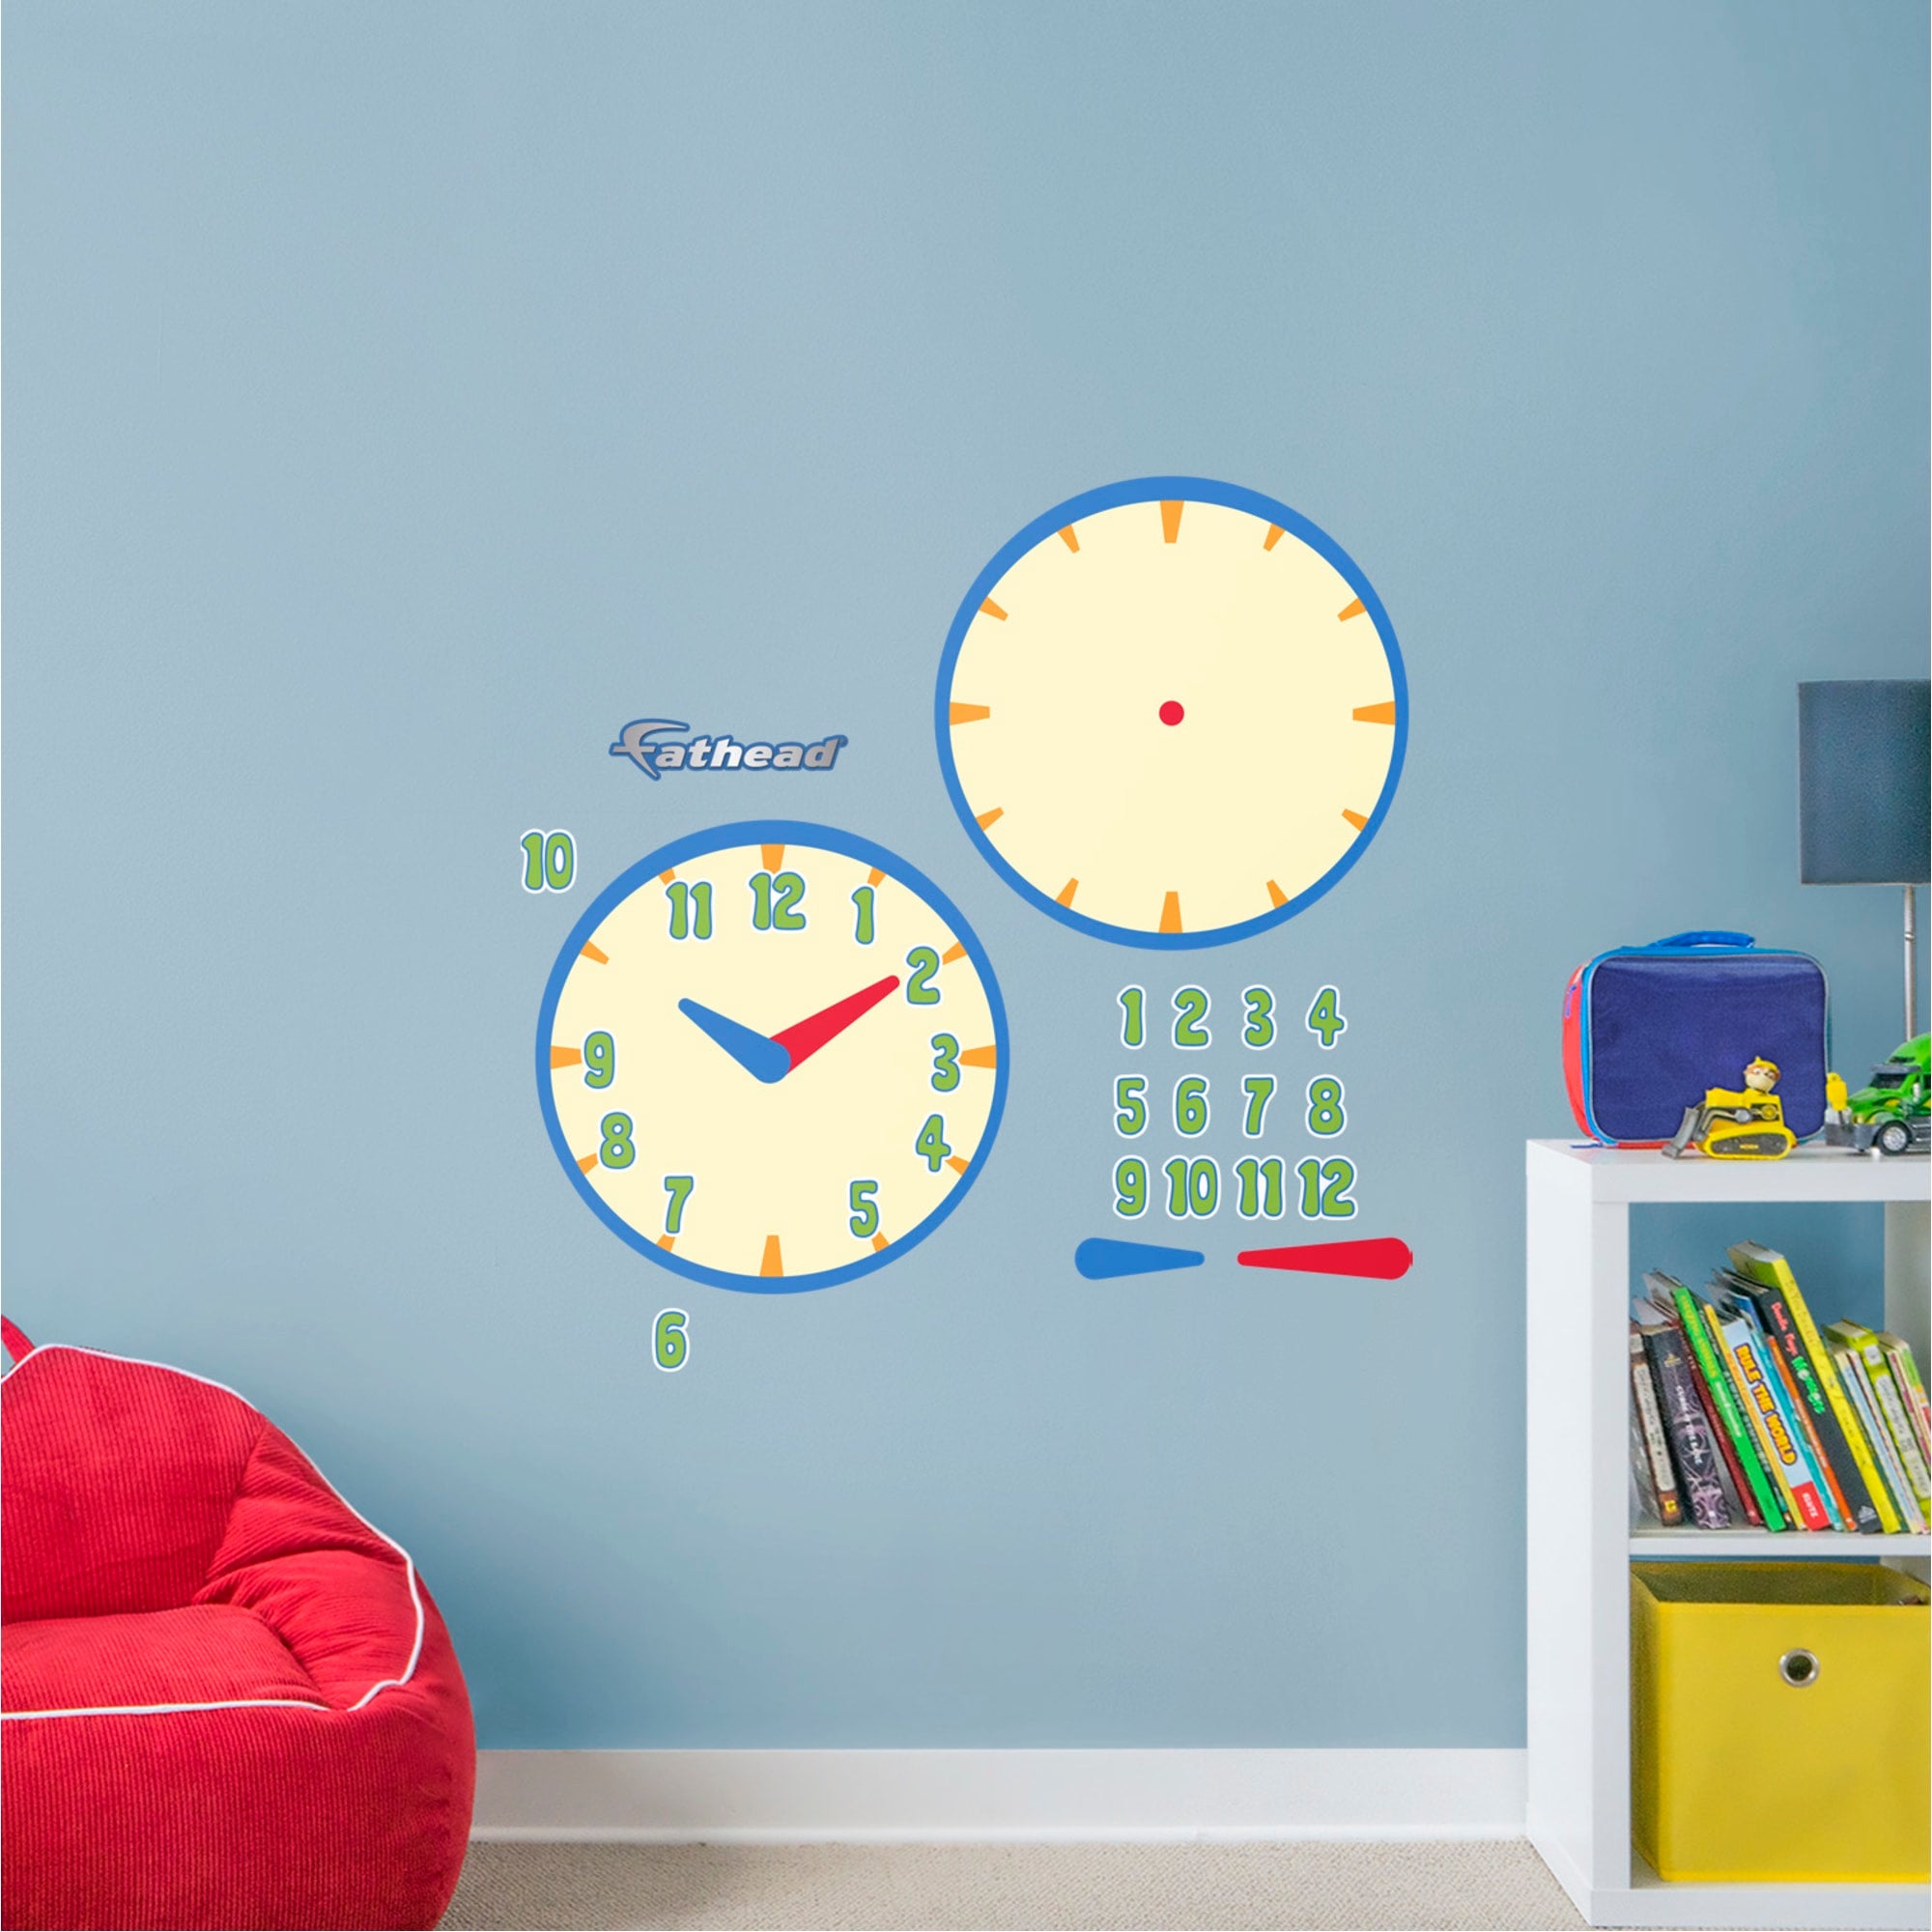 Learning Time Clock - Removable Dry Erase Vinyl Decal 75"W x 39.5"H by Fathead